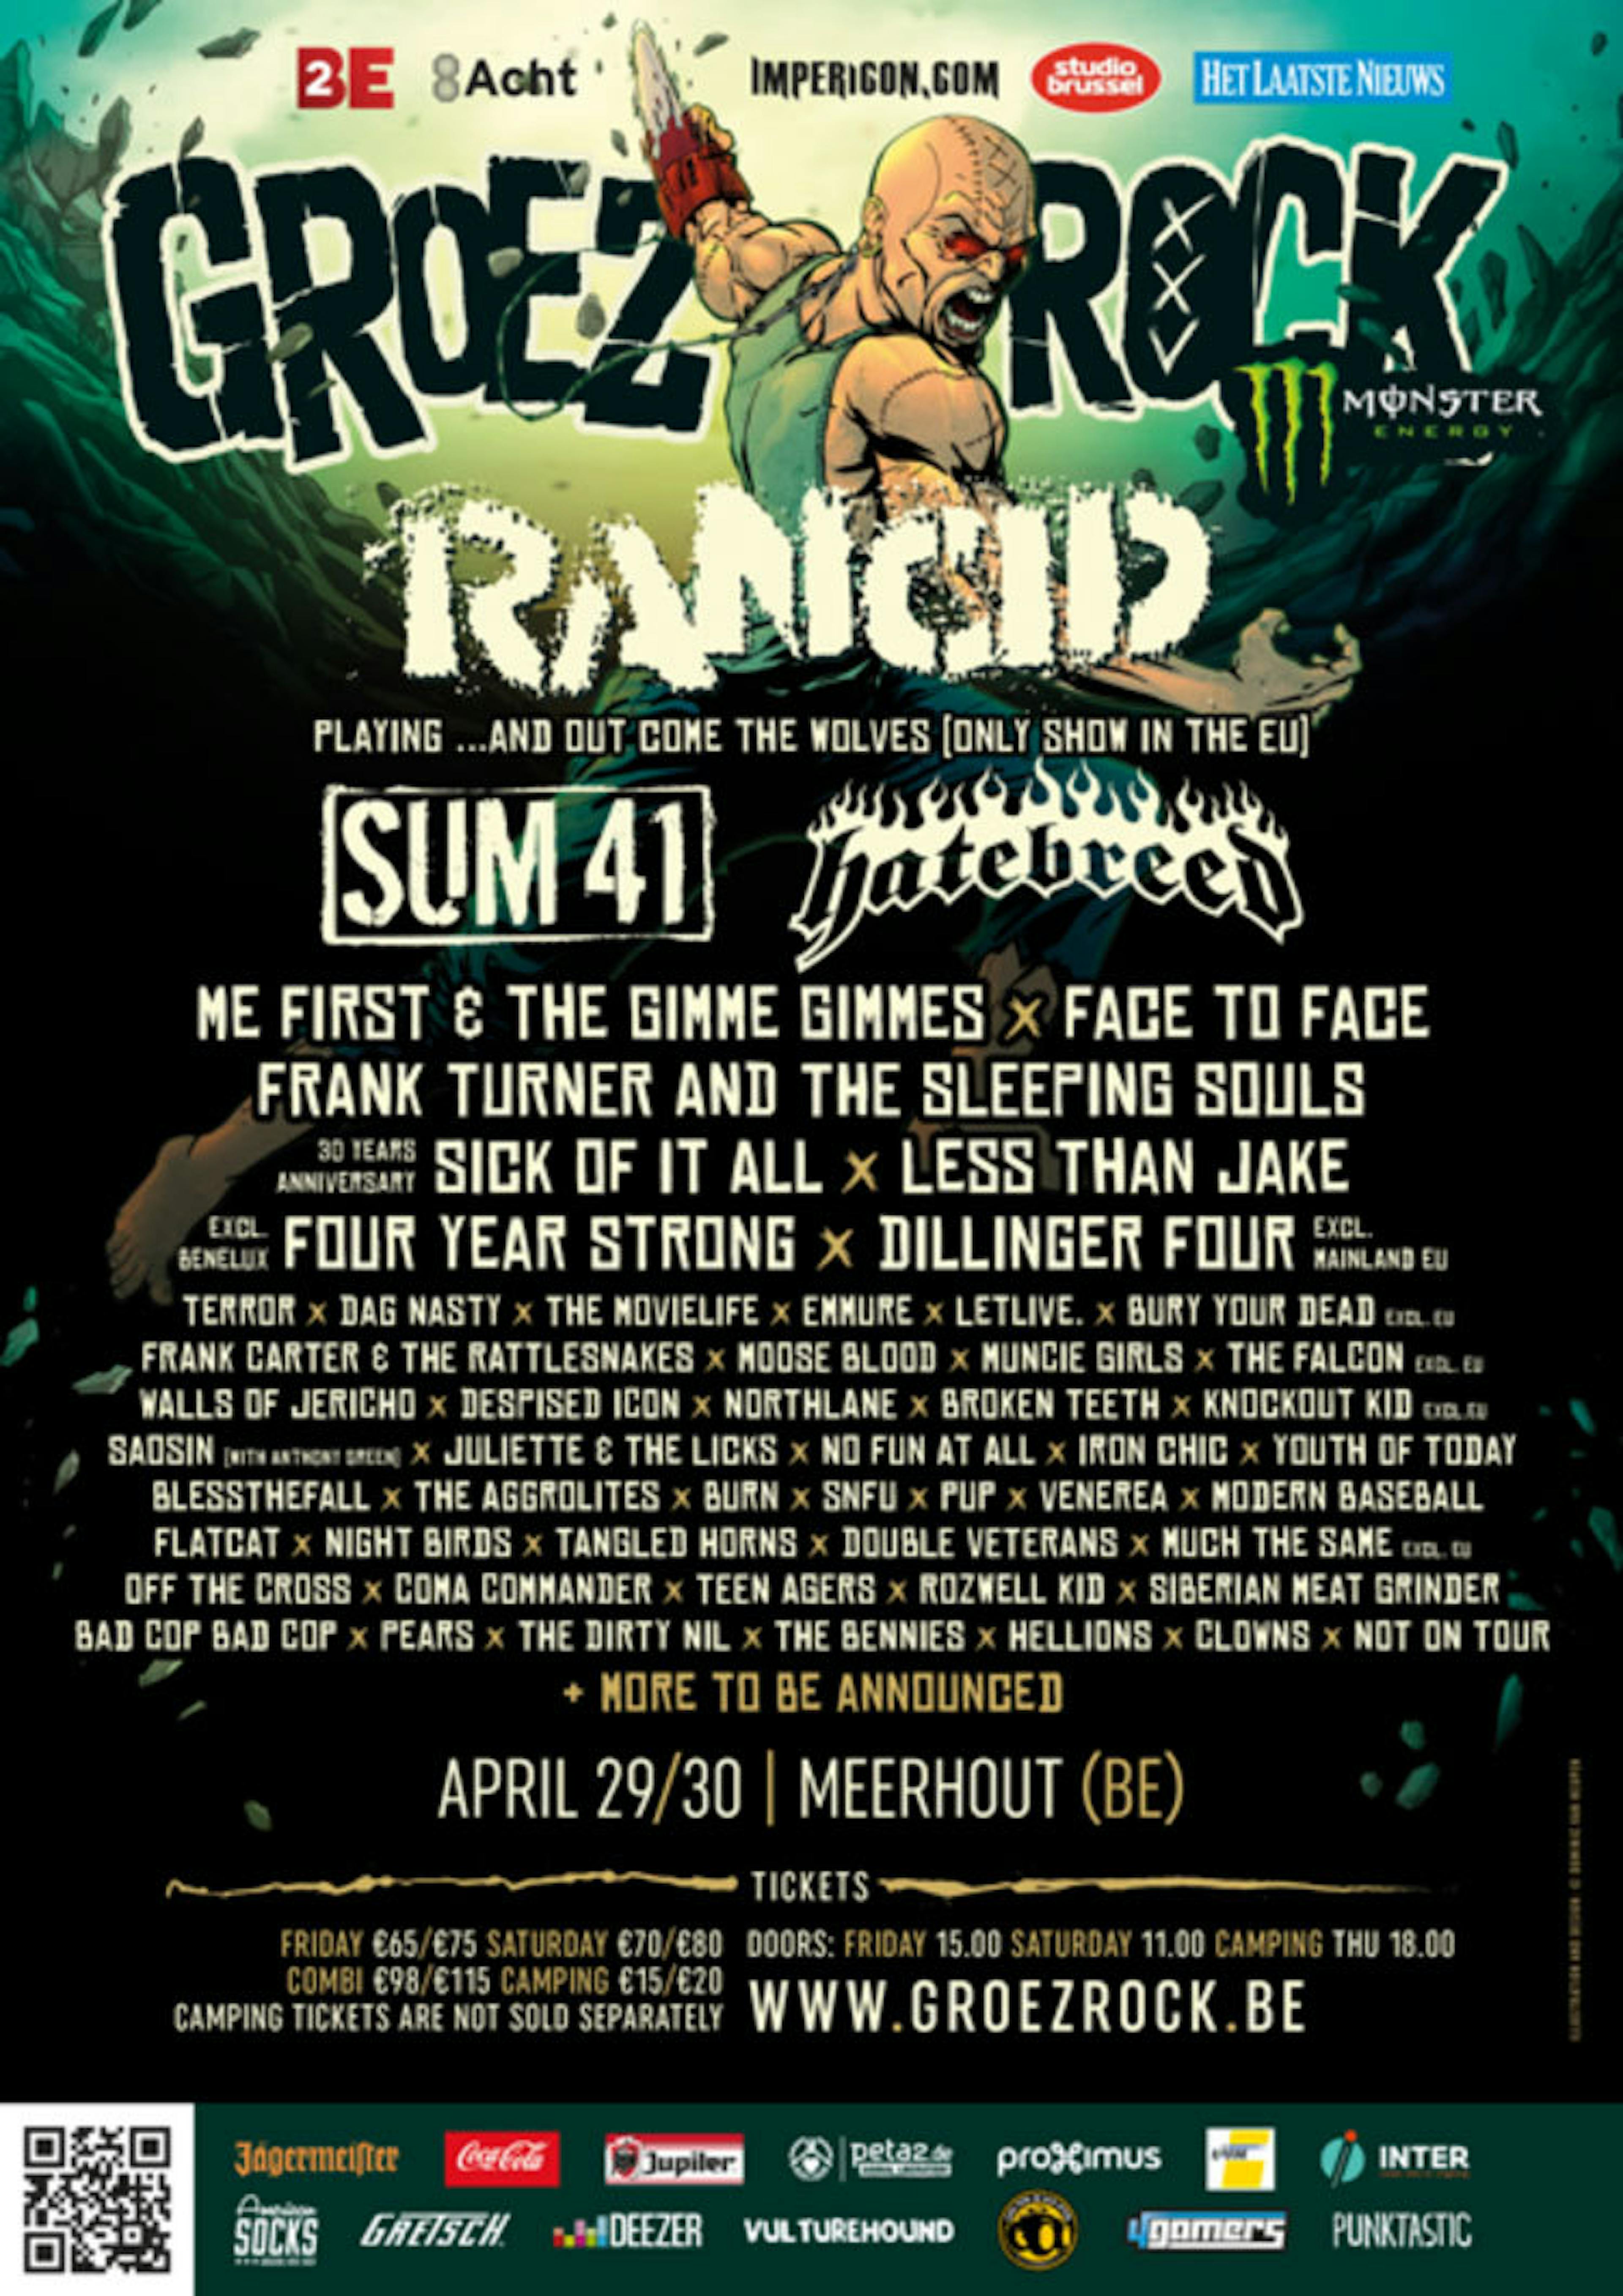 Frank Carter & The Rattlesnakes And Loads More Confirmed For Groezrock